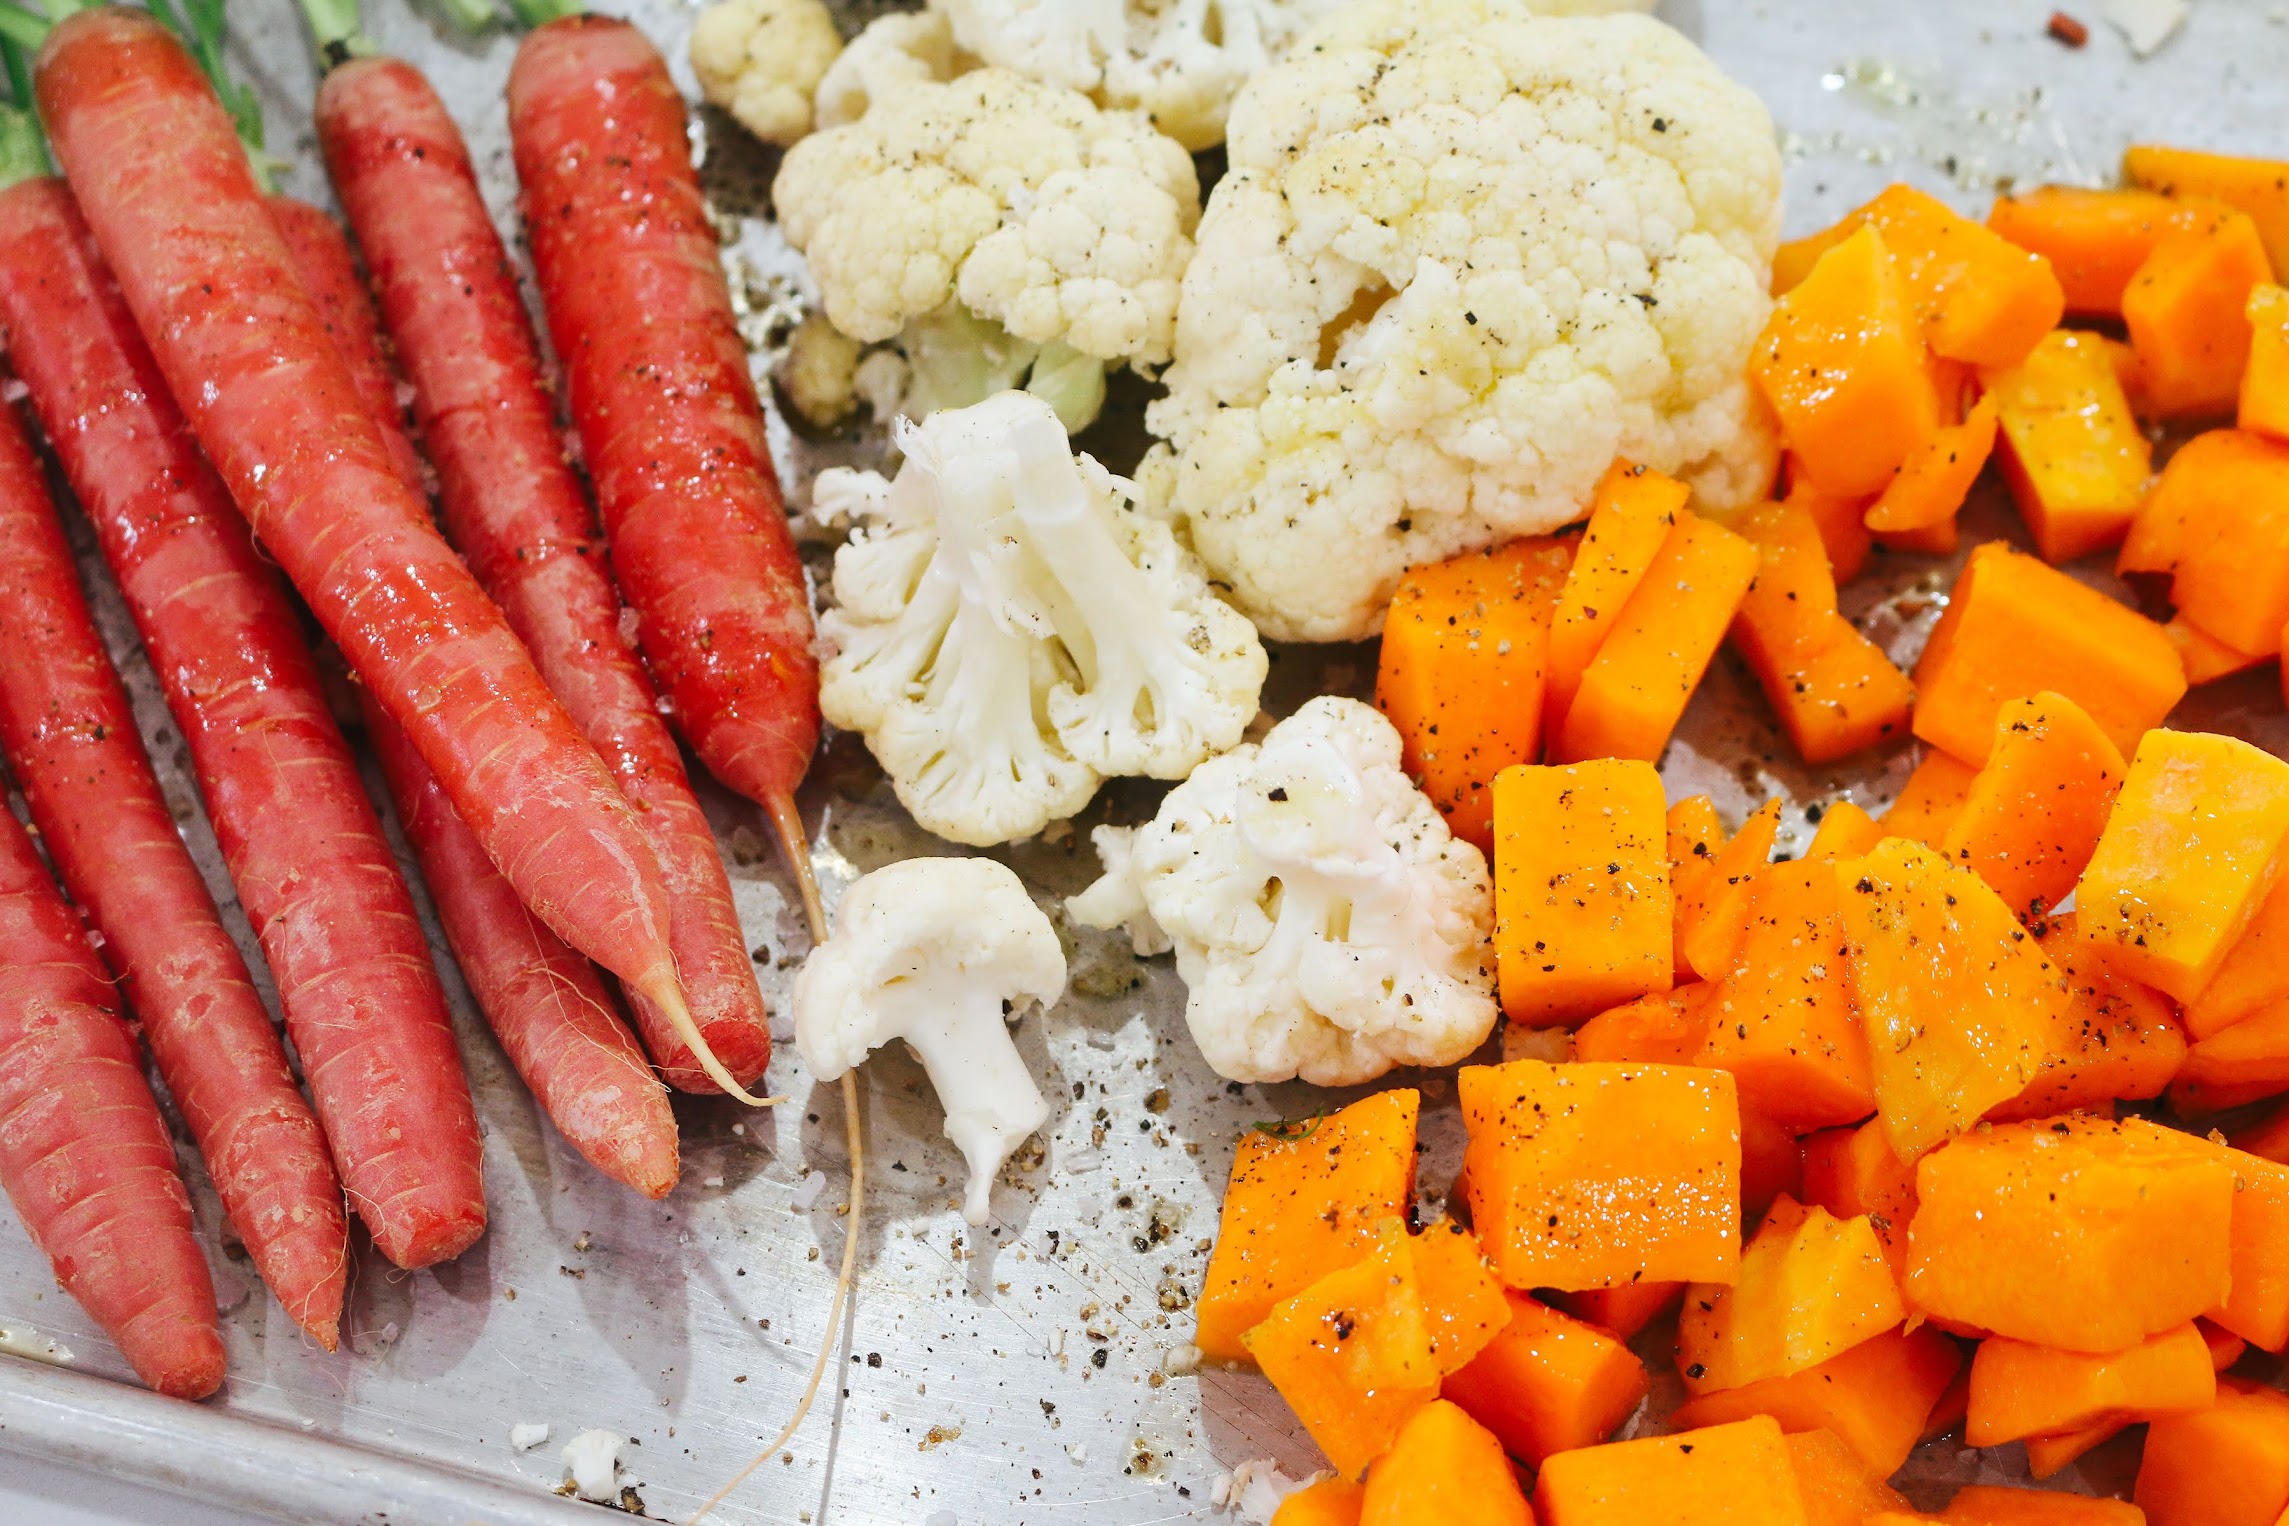 A plate of food with carrots, cauliflower and broccoli.